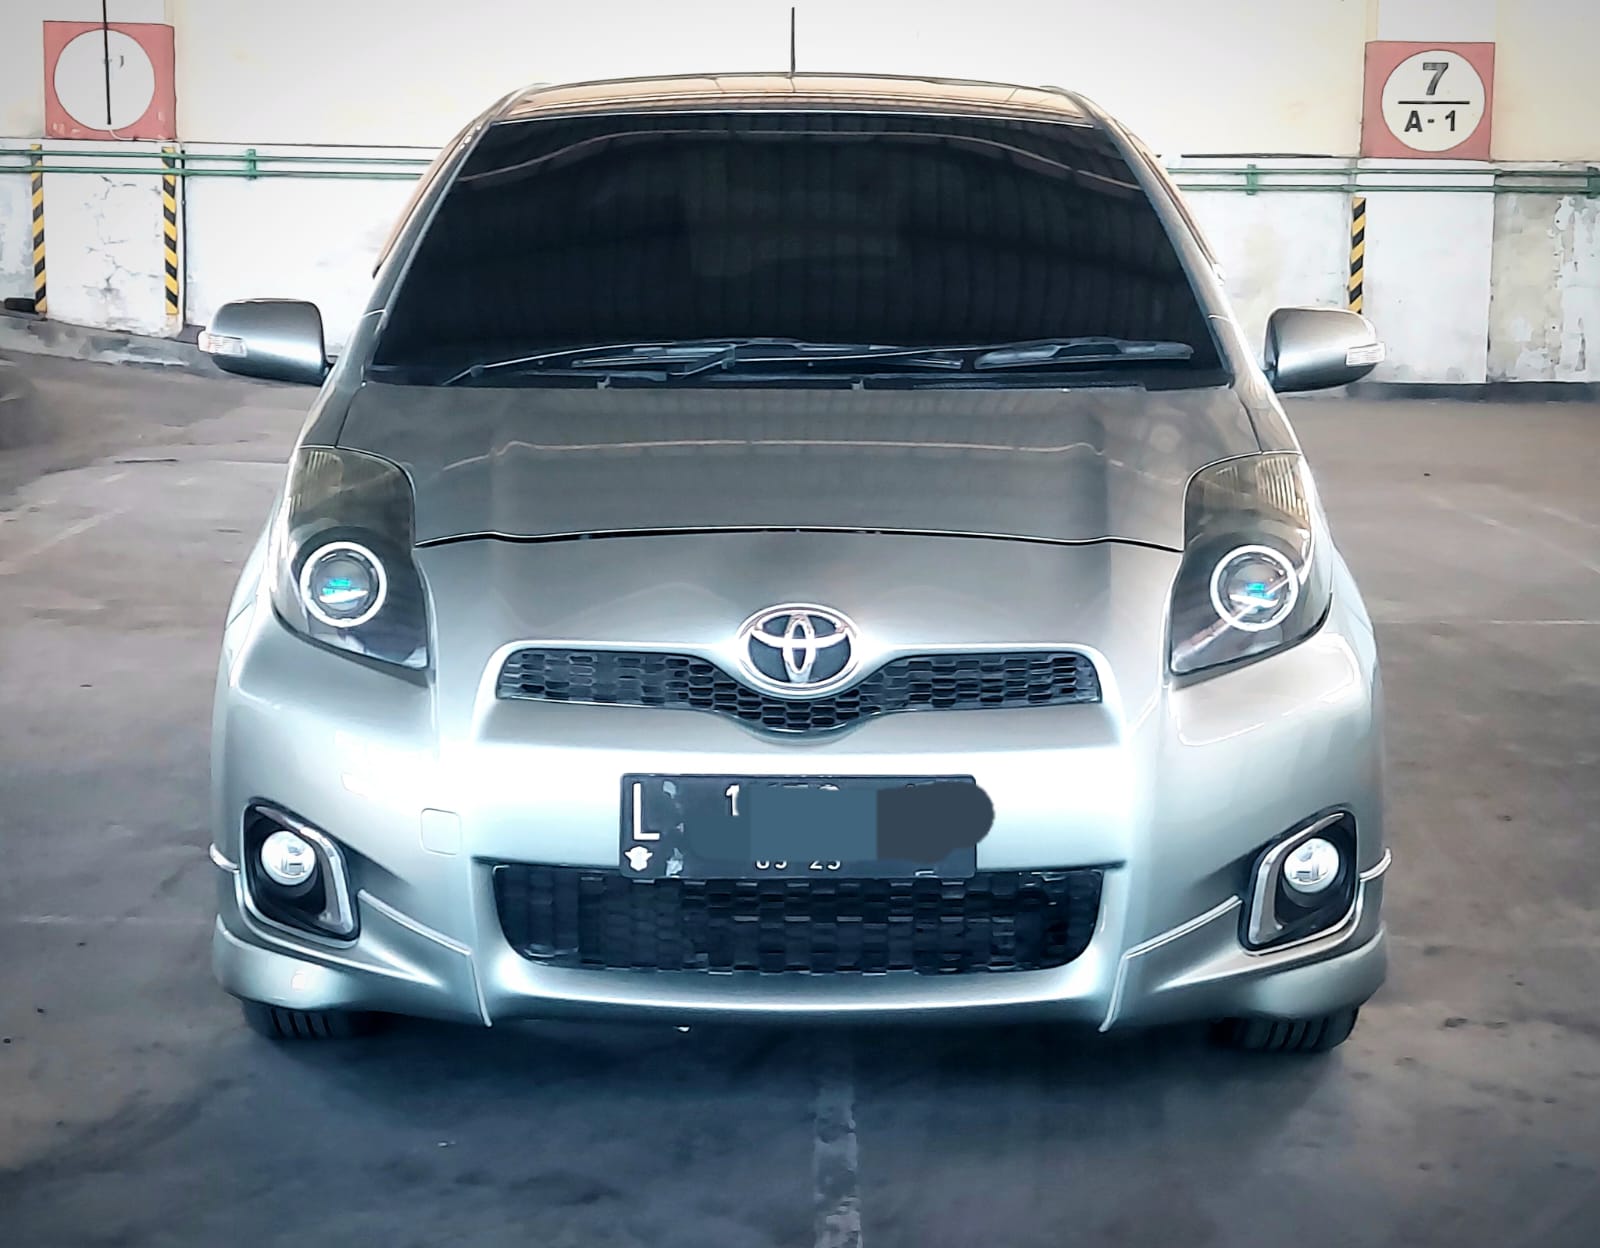 Used 2012 Toyota Yaris S TRD 1.5L AT S TRD 1.5L AT